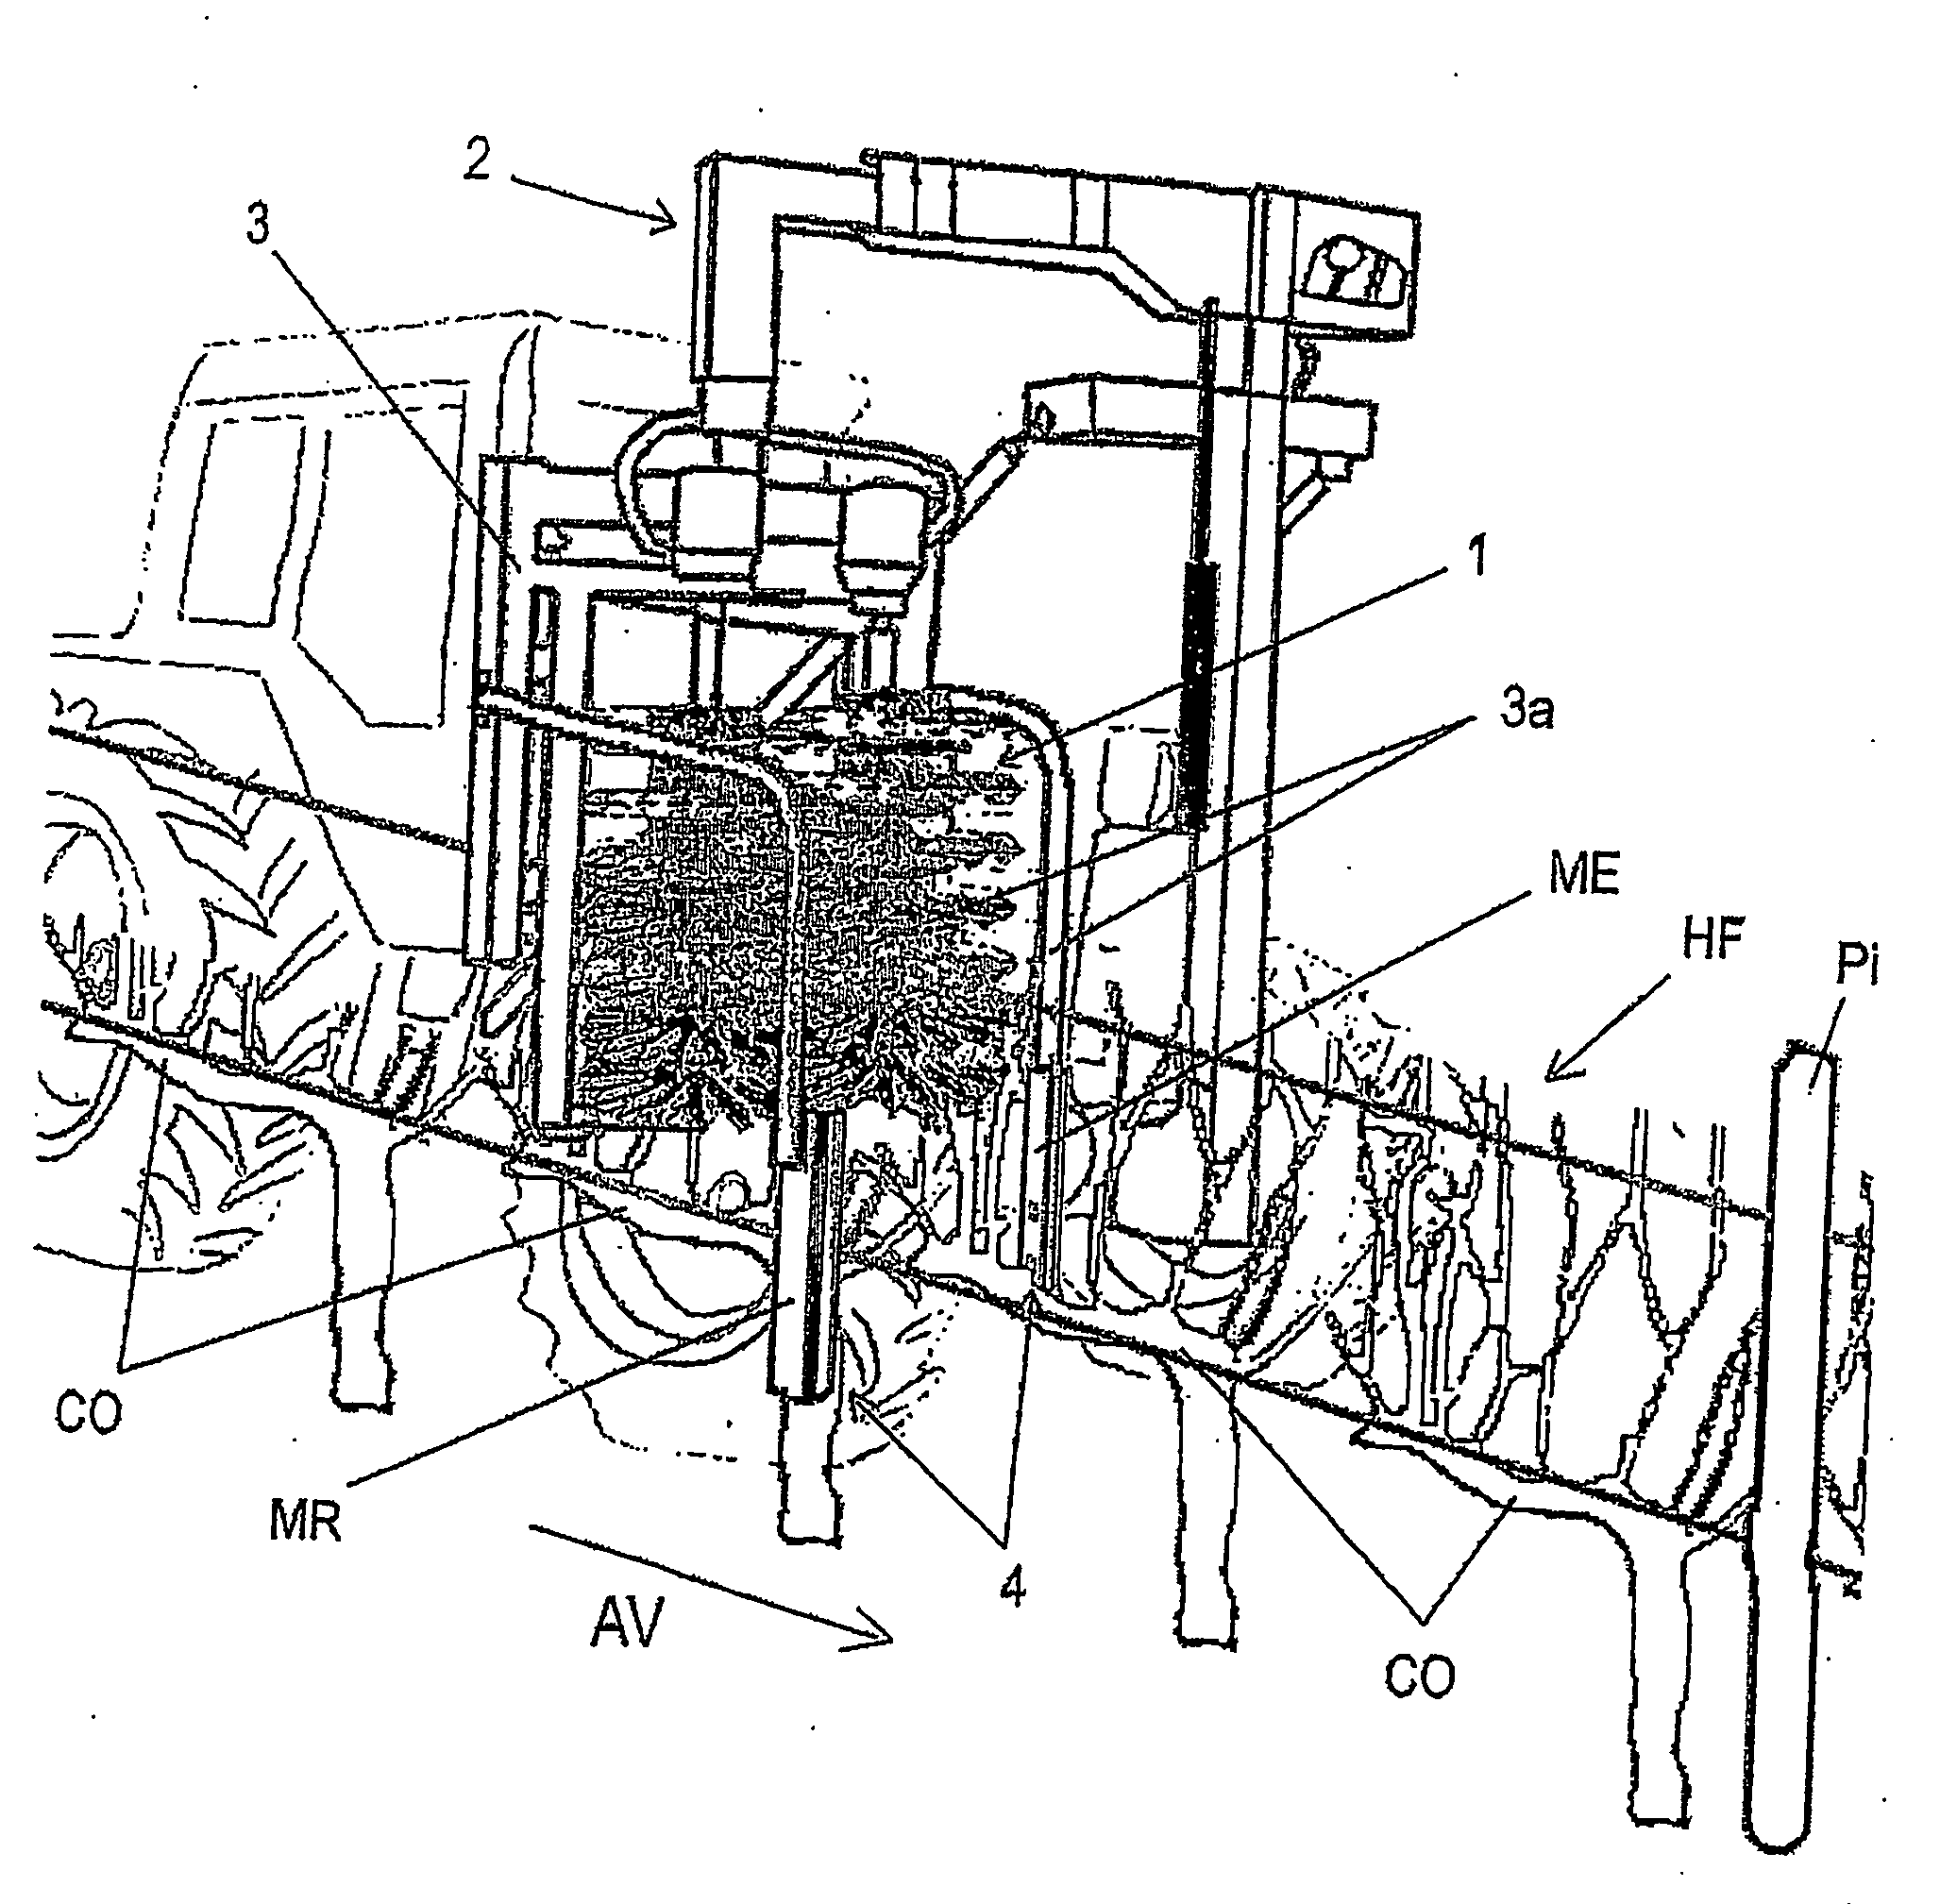 Method and device for analysis of the structure and the composition of cultured hedges such as for example rows of vines